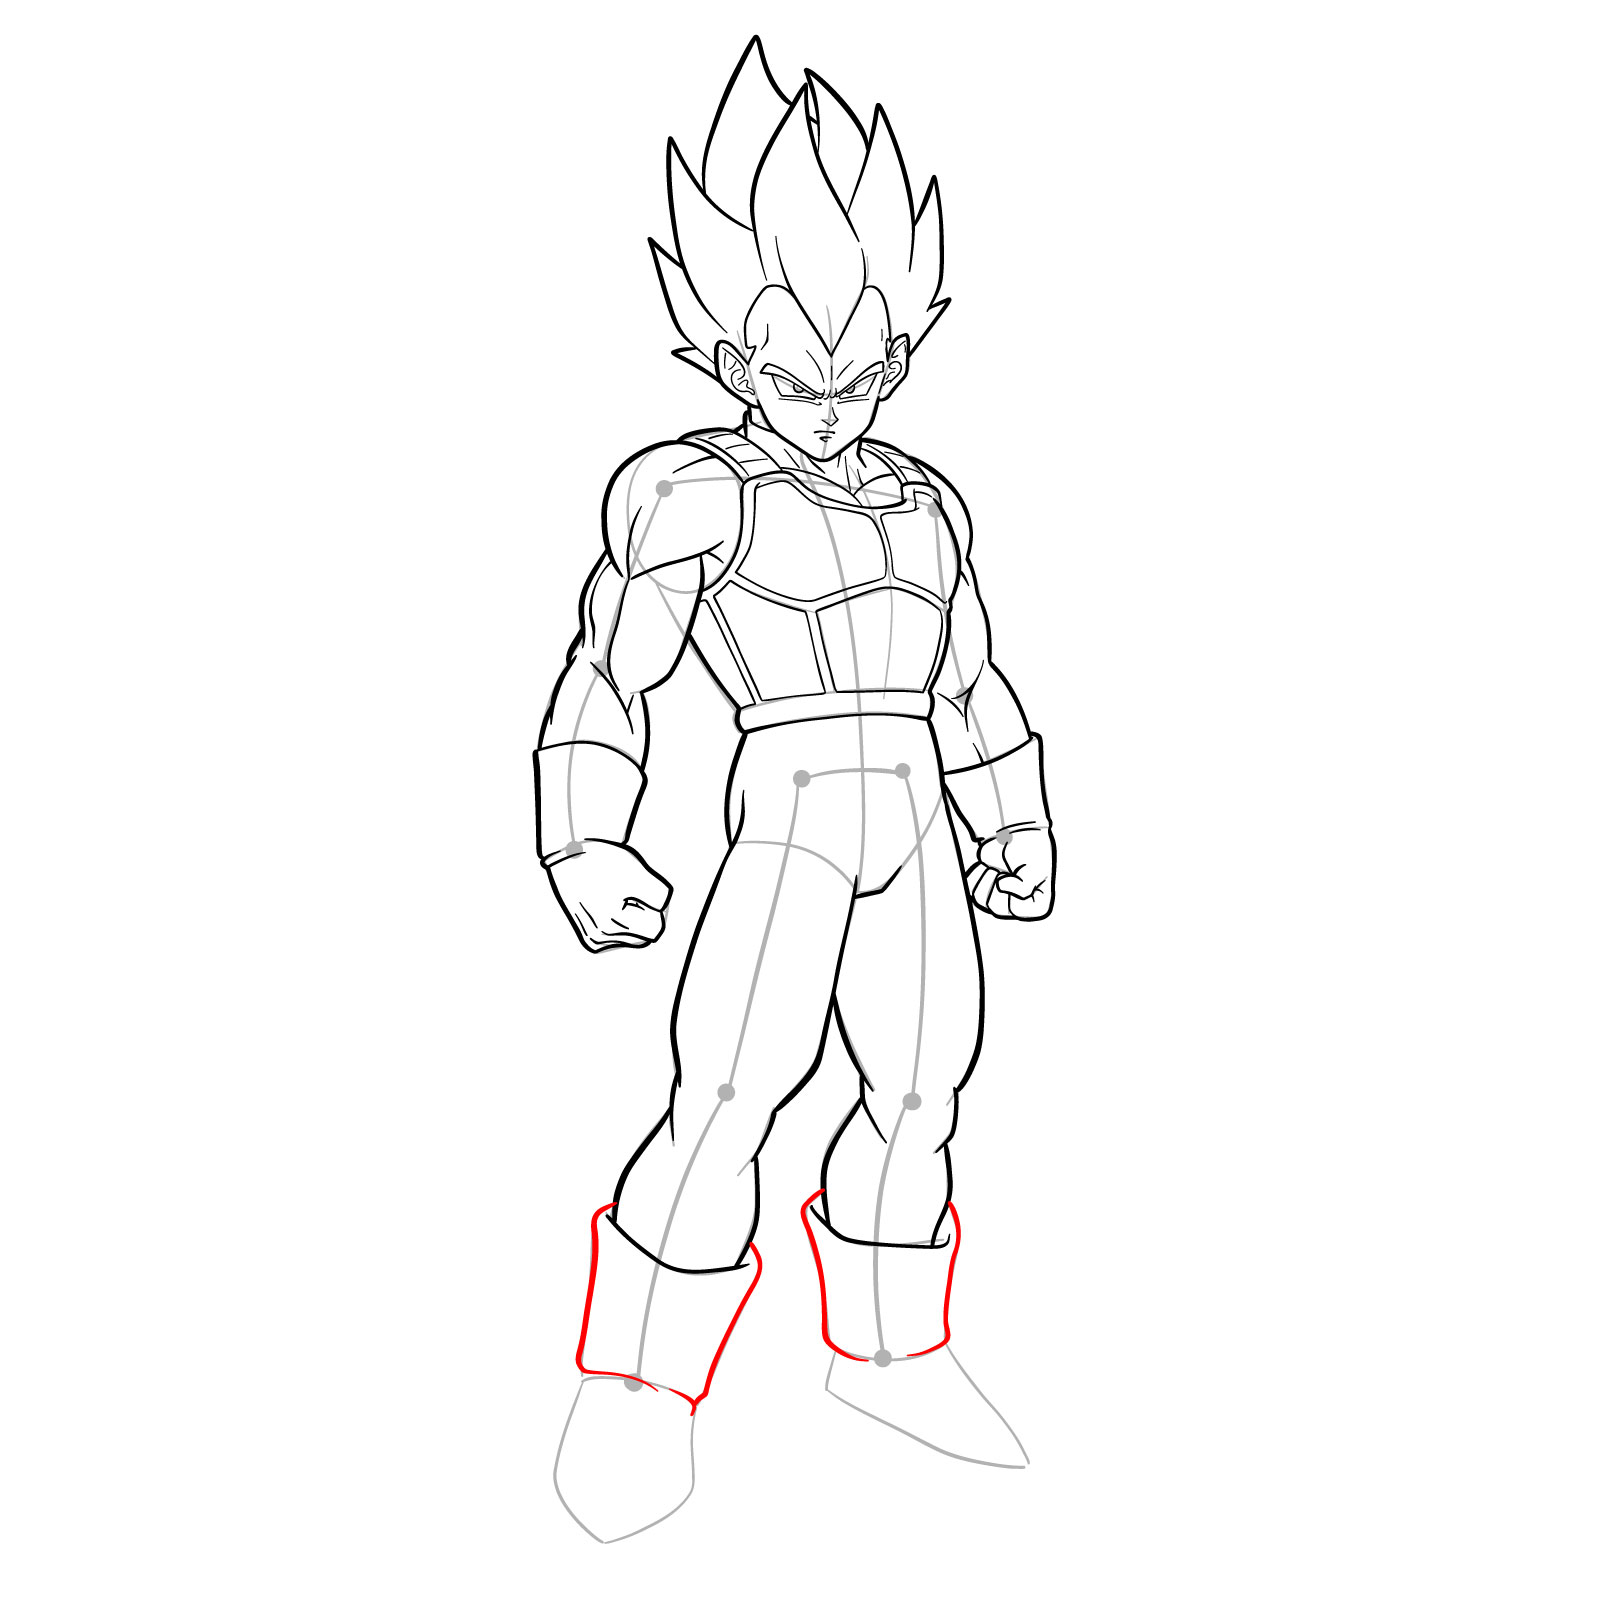 How to draw Vegeta in SSGSS - step 37